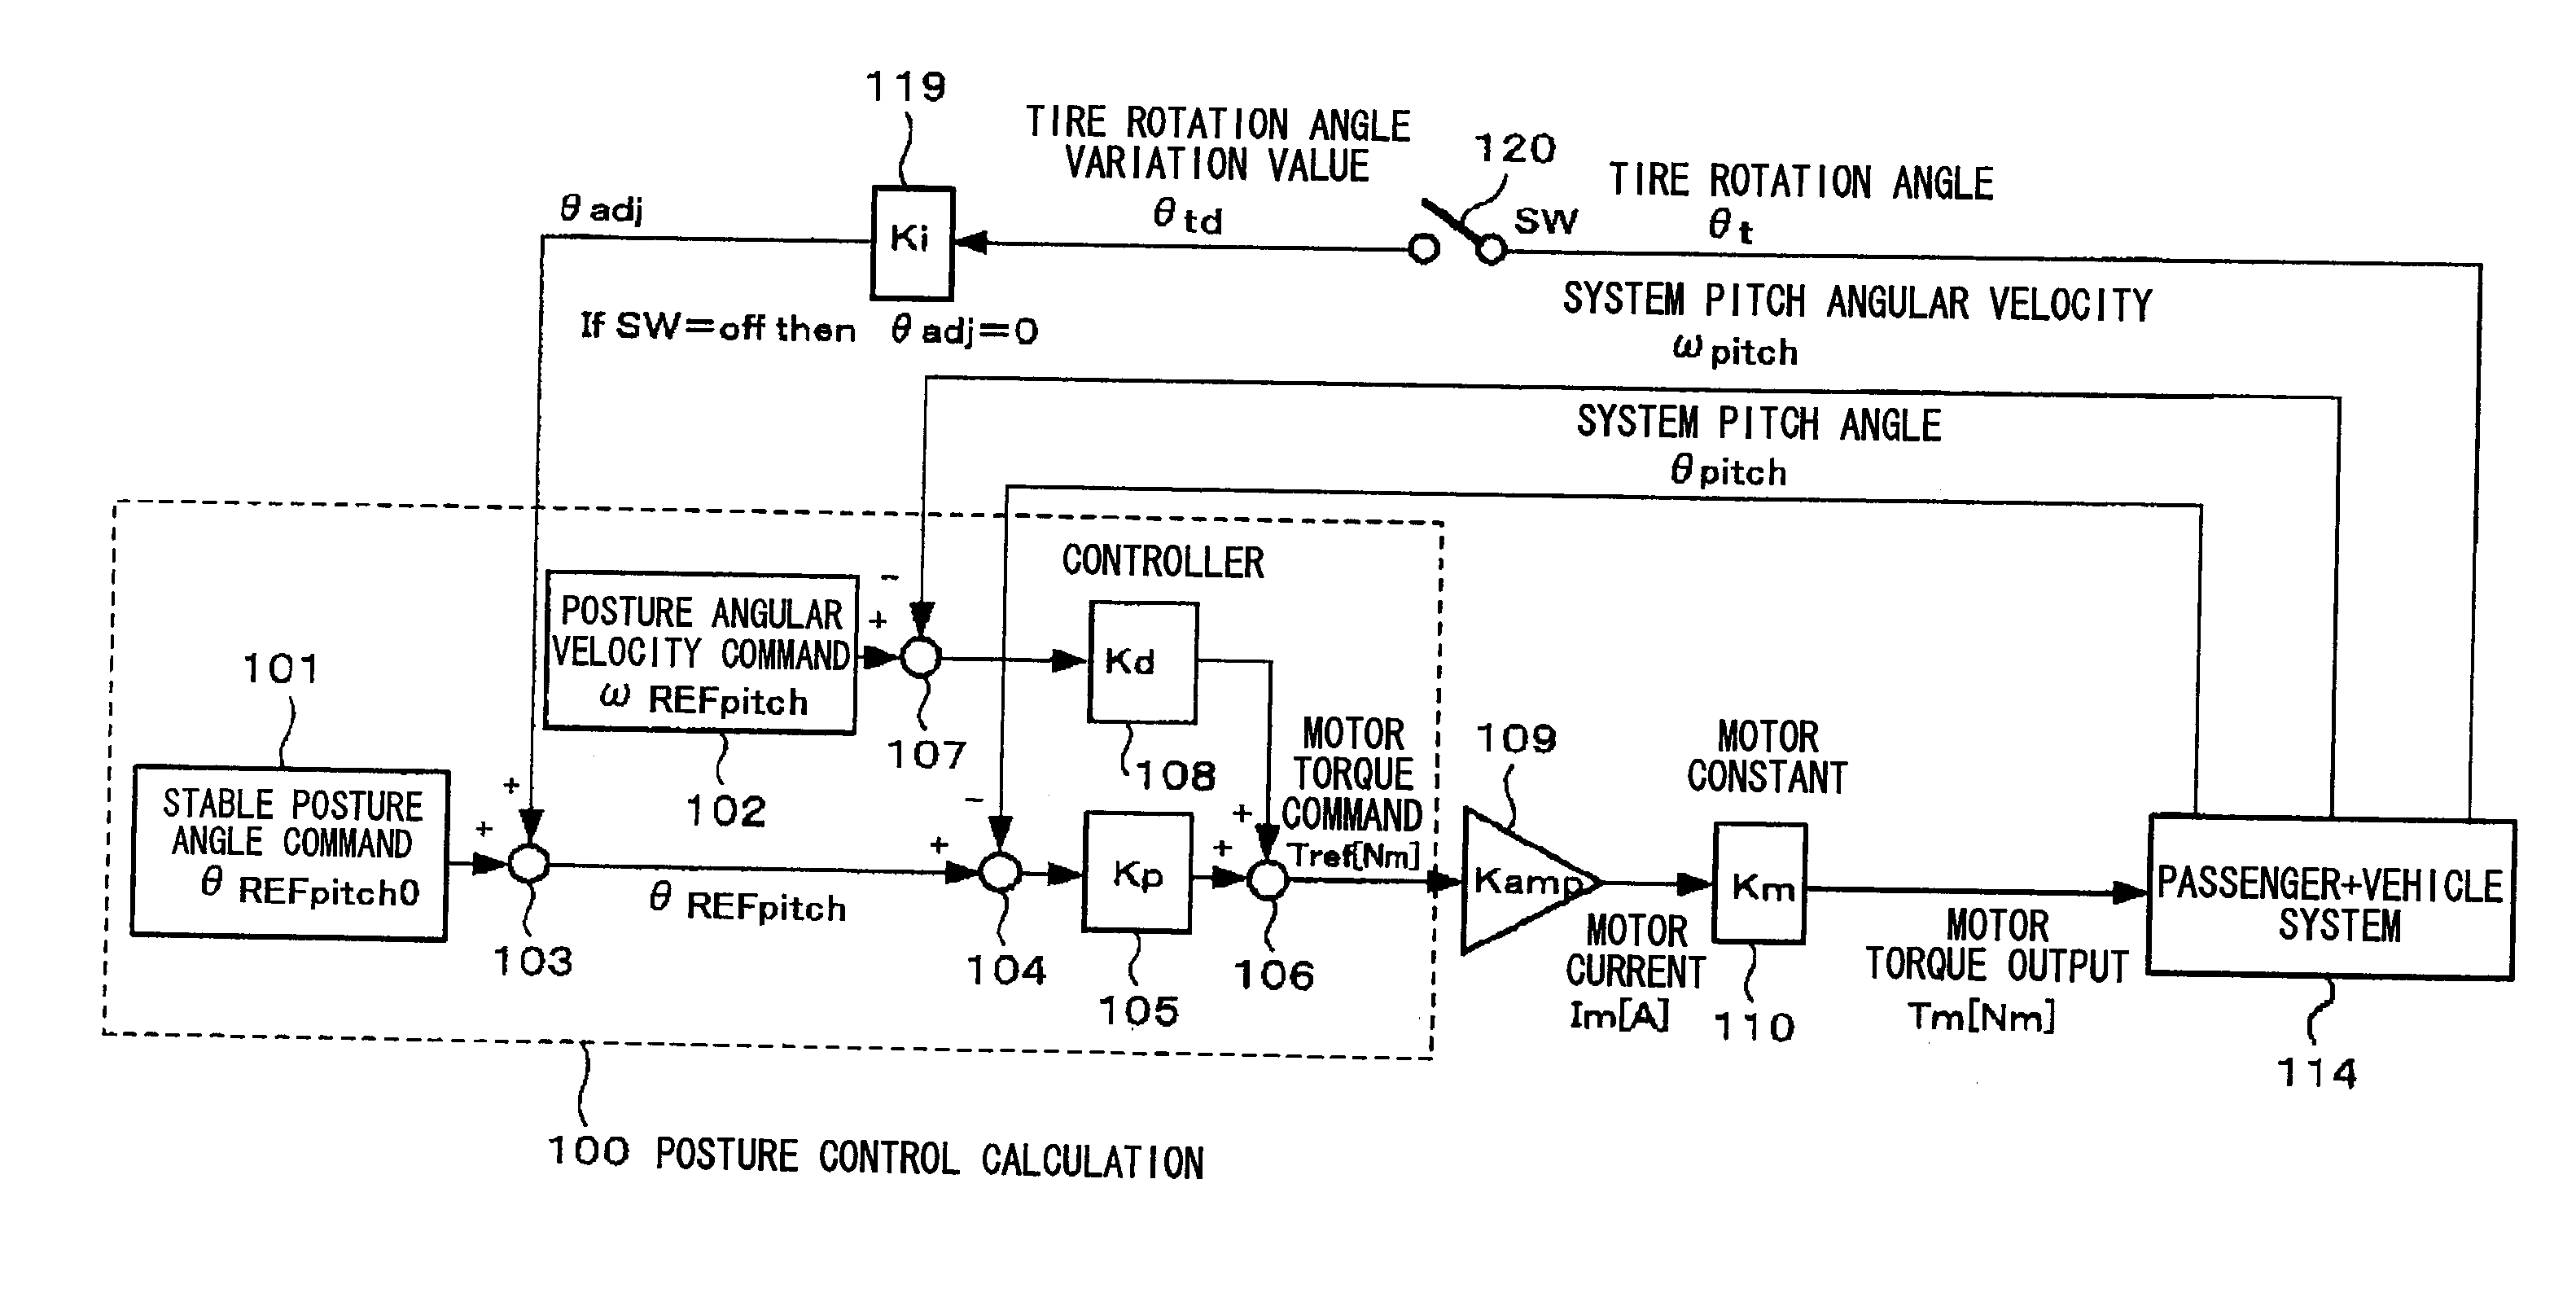 Traveling apparatus and method of controlling same